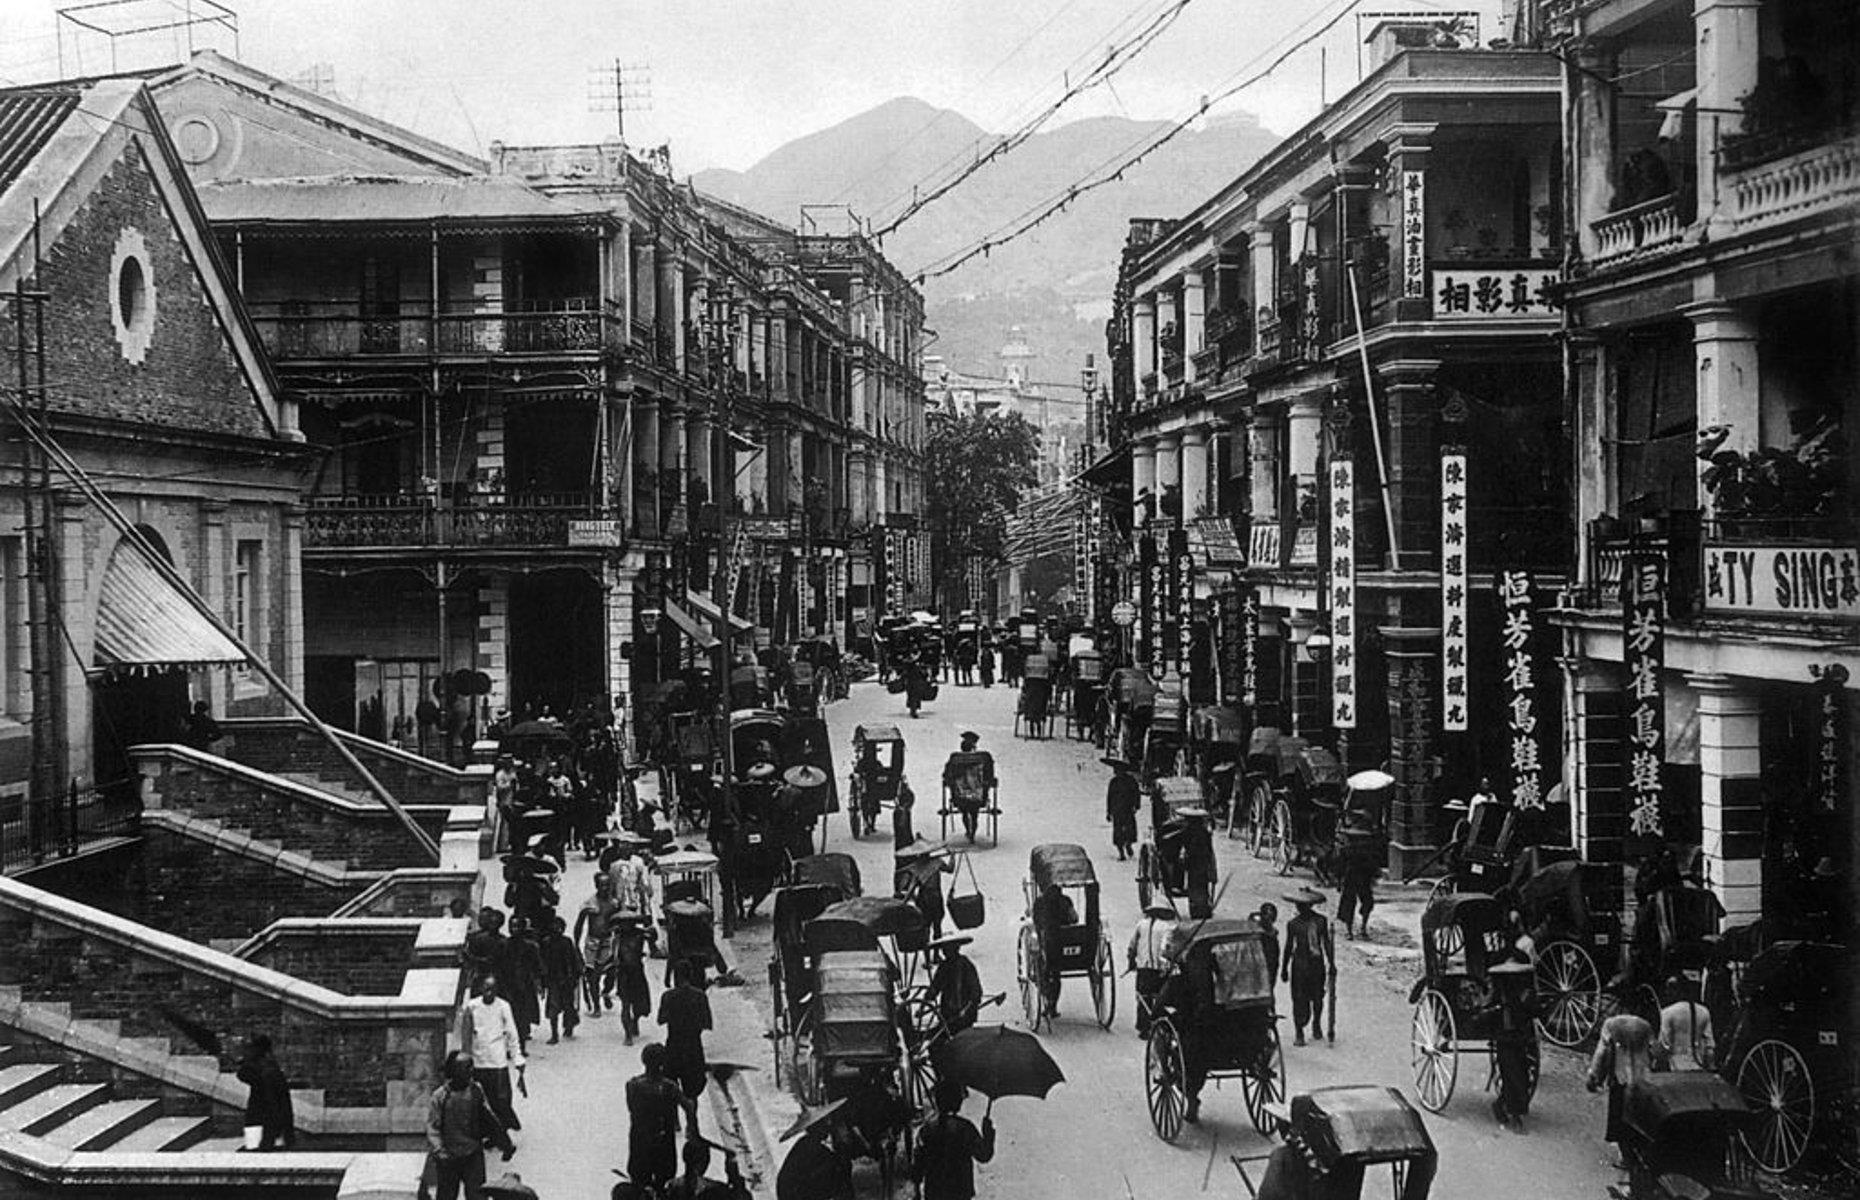 The Second World War and the 1950s brought an influx of immigration from mainland China and Hong Kong began to industrialize quickly, becoming a center for electrical goods. Improved infrastructure, such as transport, schools, a civil service and social housing, meant that by 1990, Hong Kong was a global financial centre. The colonial lease Britain had on Hong Kong expired in 1997 and things have been politically volatile, though travelers are still lured to this frenetic city.